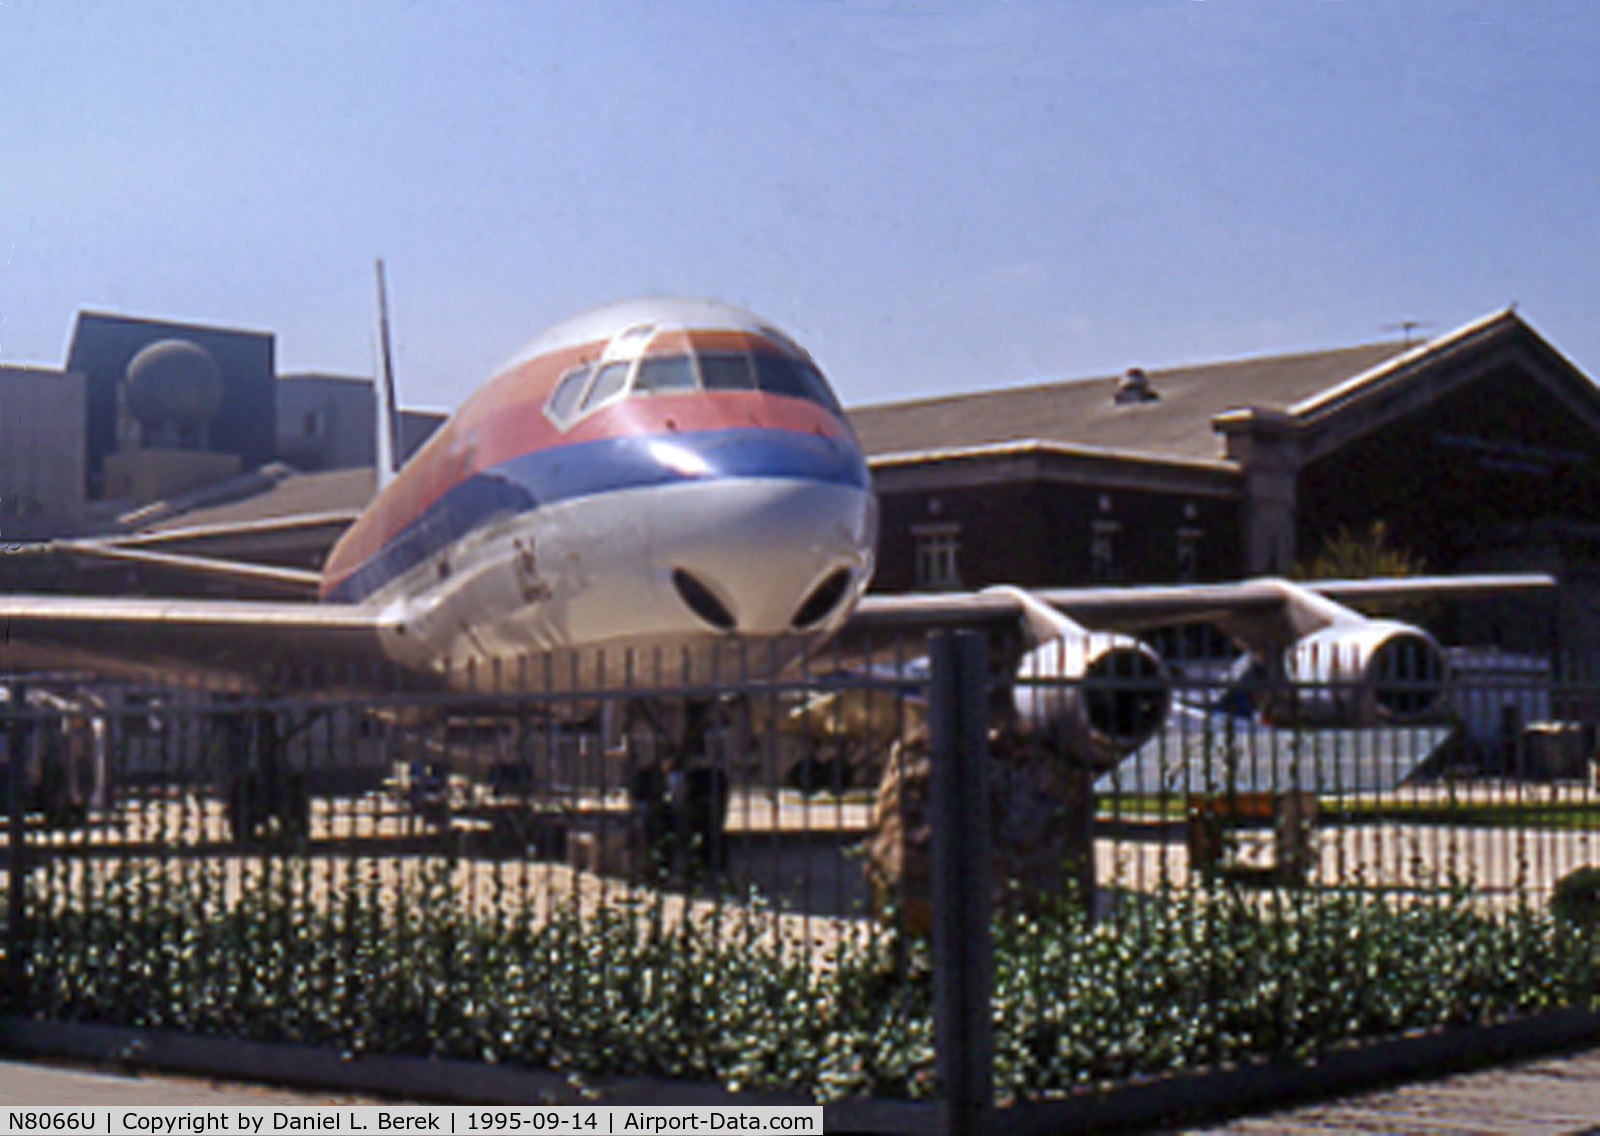 N8066U, 1966 Douglas DC-8-52 C/N 45850, She has been on display at the Los Angeles Museum of Science & Industry for some 20 years.  The aircraft has since been mounted on a plinth and repainted in its original 1960s delivery scheme.